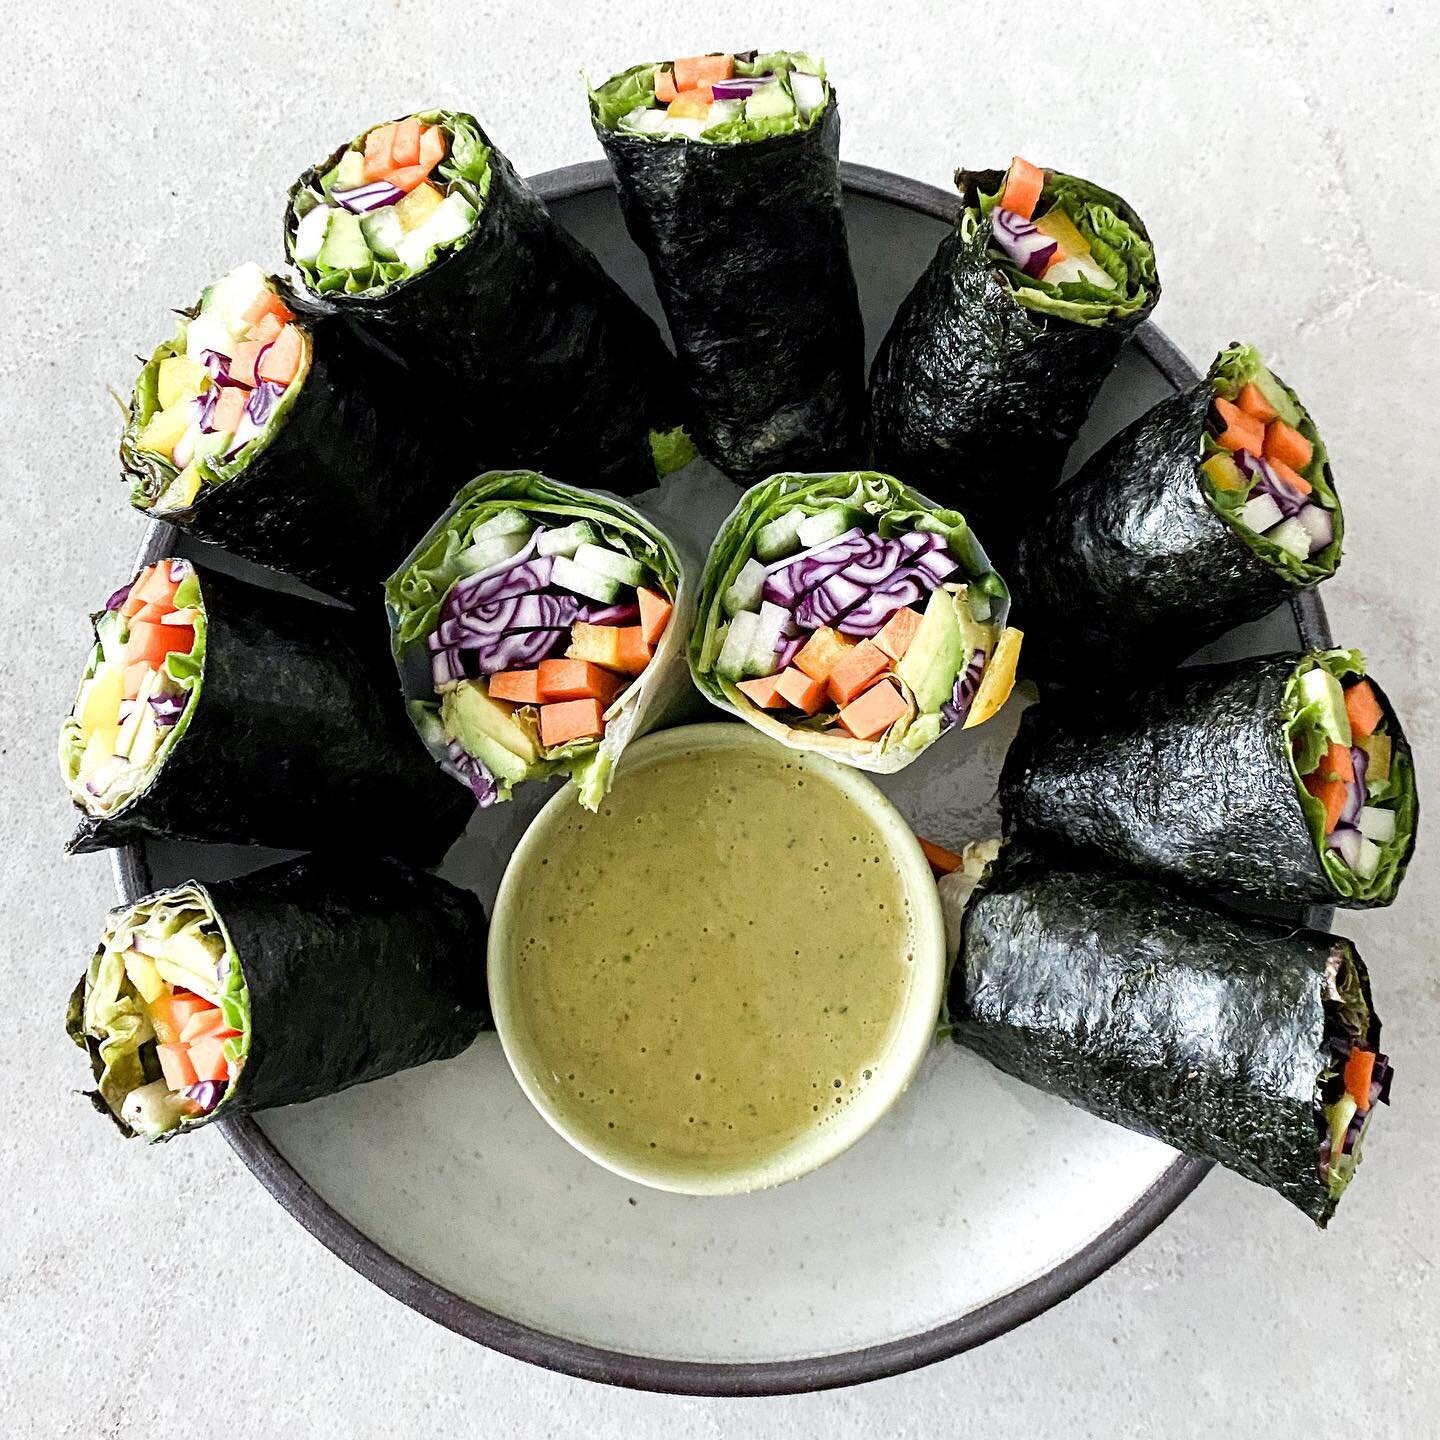 nori veggie rolls with a cilantro almond sauce 🤤

this has been one of my go-to dinners lately!
they are super simple and easy to make 
no cooking required - just blend the sauce and create your rolls 

you will need:
nori sheets
veggies of choice -